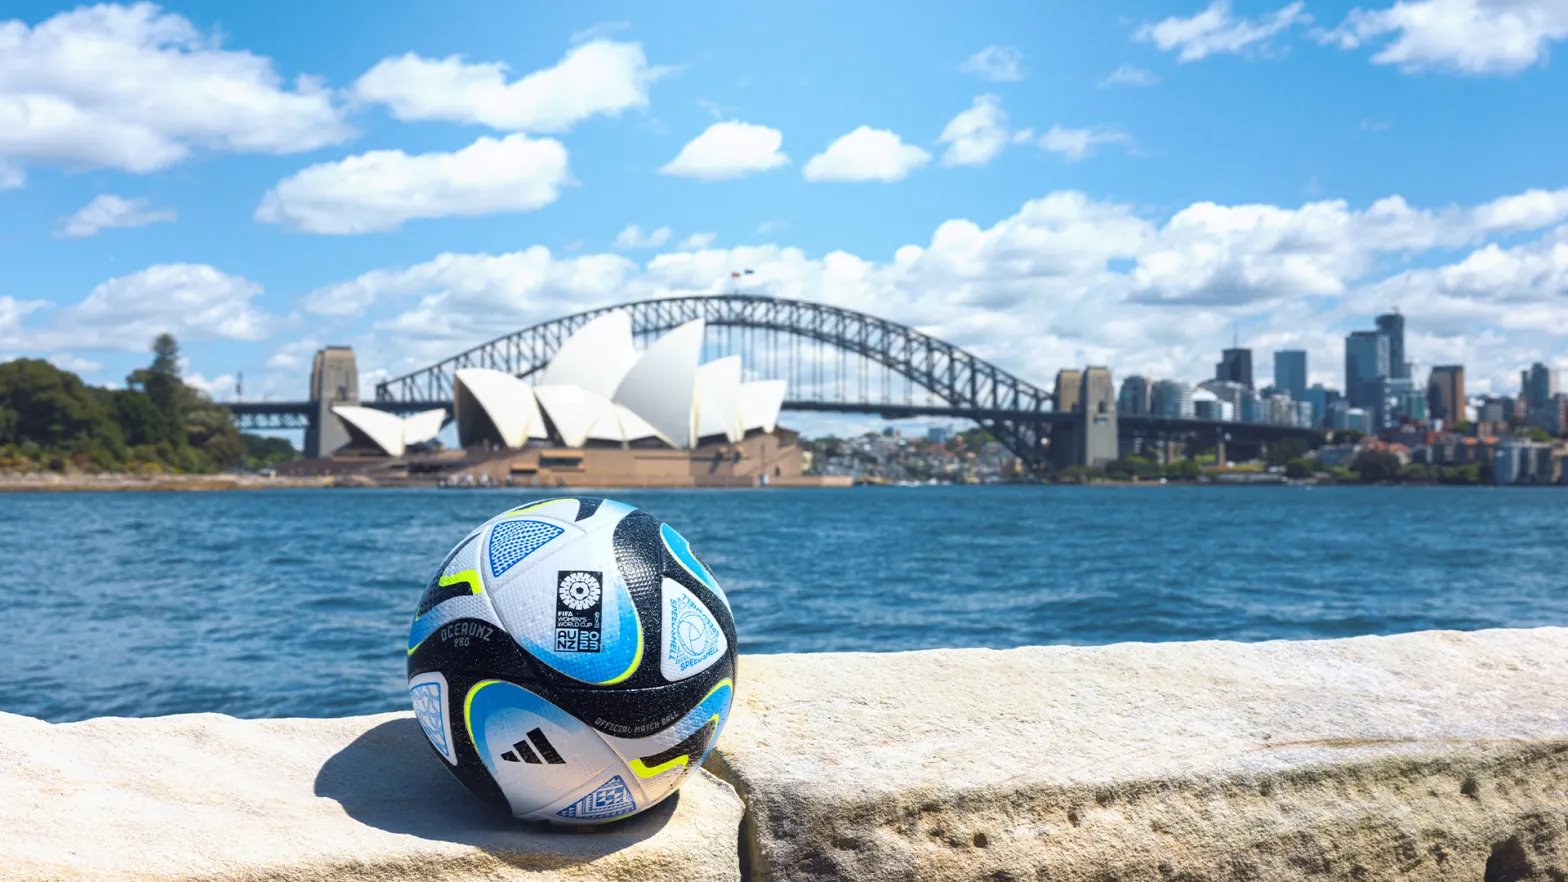 Football with Sydney opera house in distance